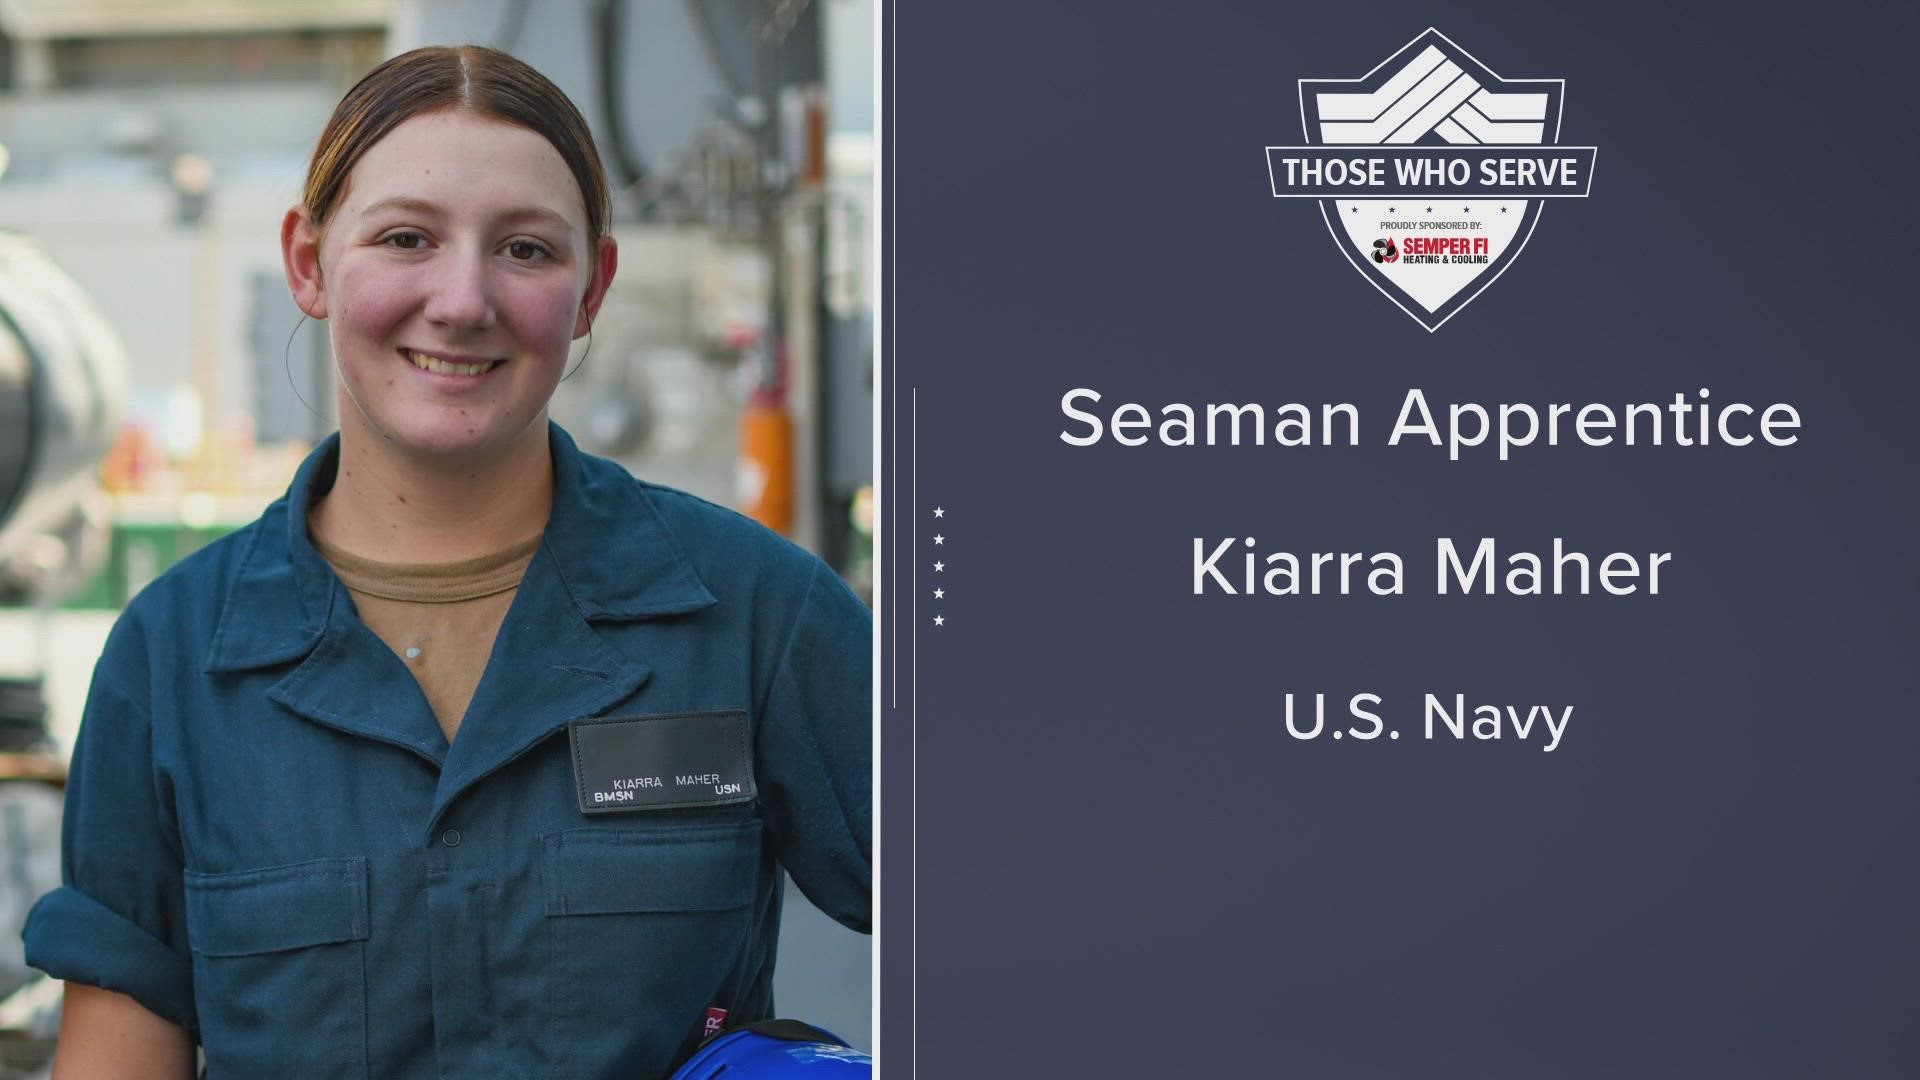 Today for our Those Who Serve segment, we're honoring Kiarra Maher.